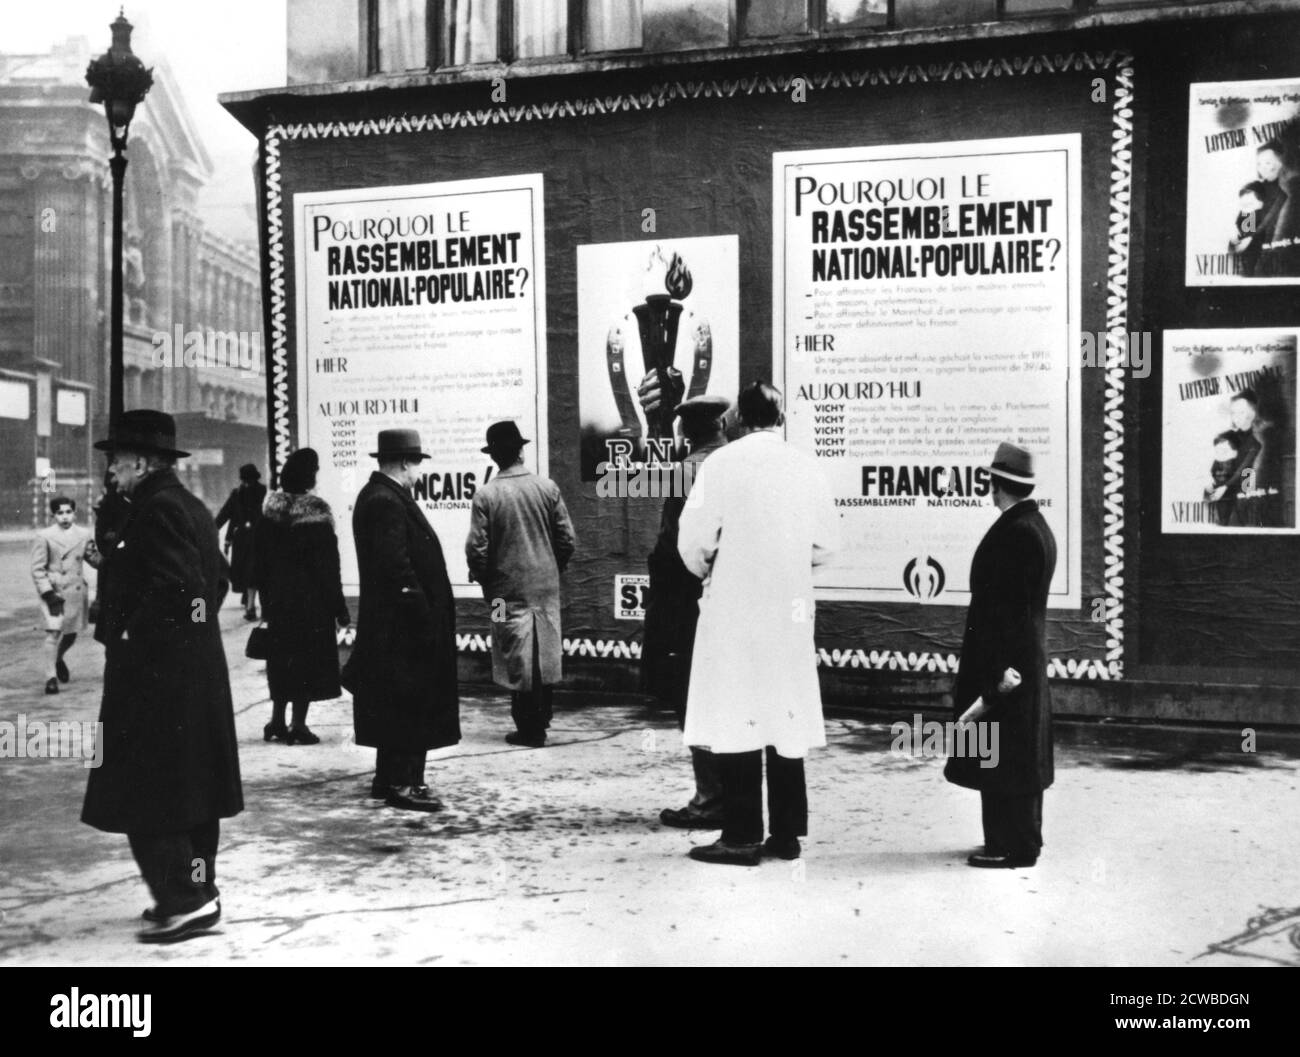 Billboard dispaying Rassemblement Nationale Populaire posters, German-occupied Paris, February 1941. The Rassmblement Nationale Populaire (RNP) was a French collaborator political party founded in February 1941 by Marcel Deat. The photographer is unknown. Stock Photo